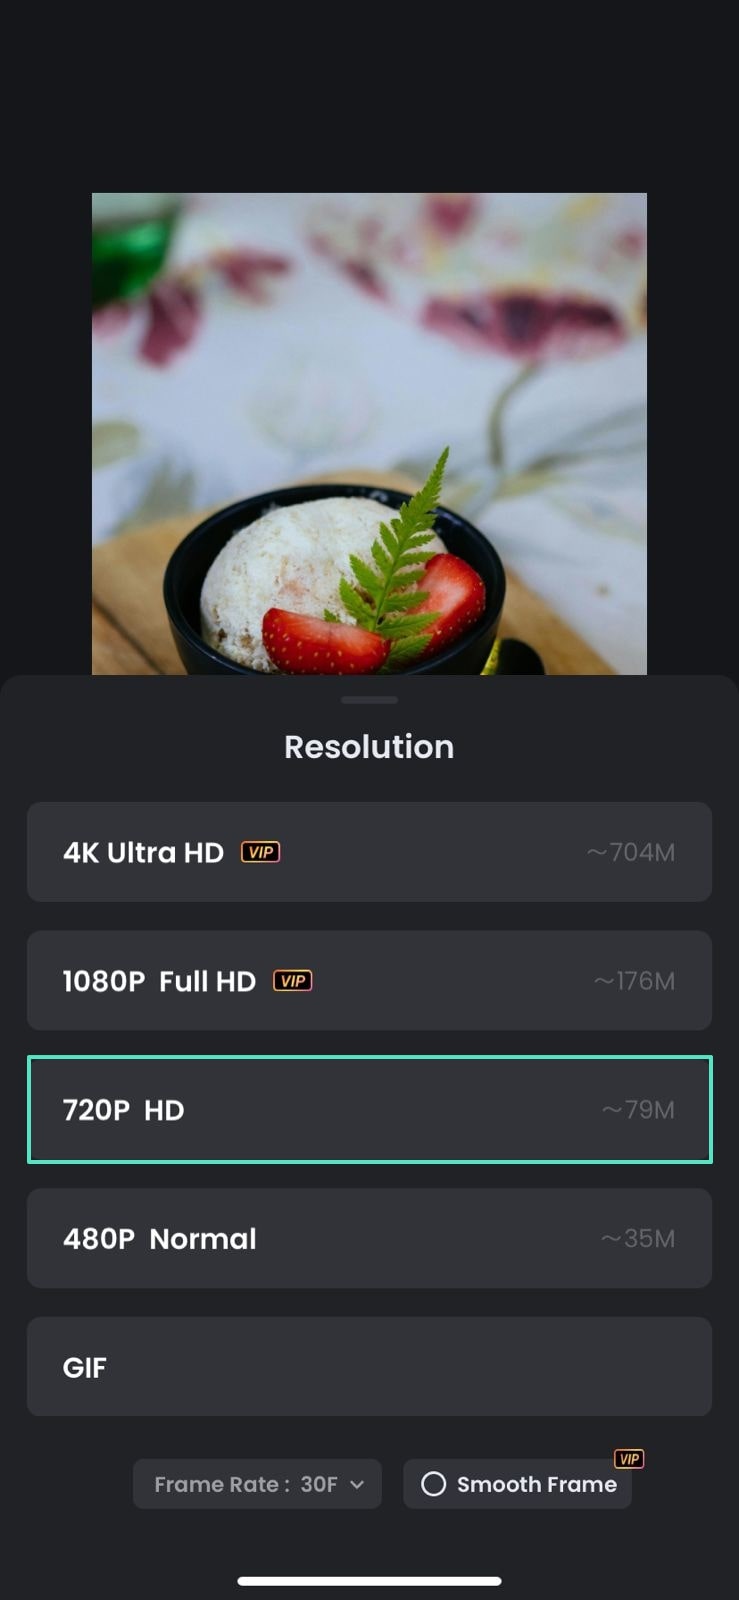 select the video resolution